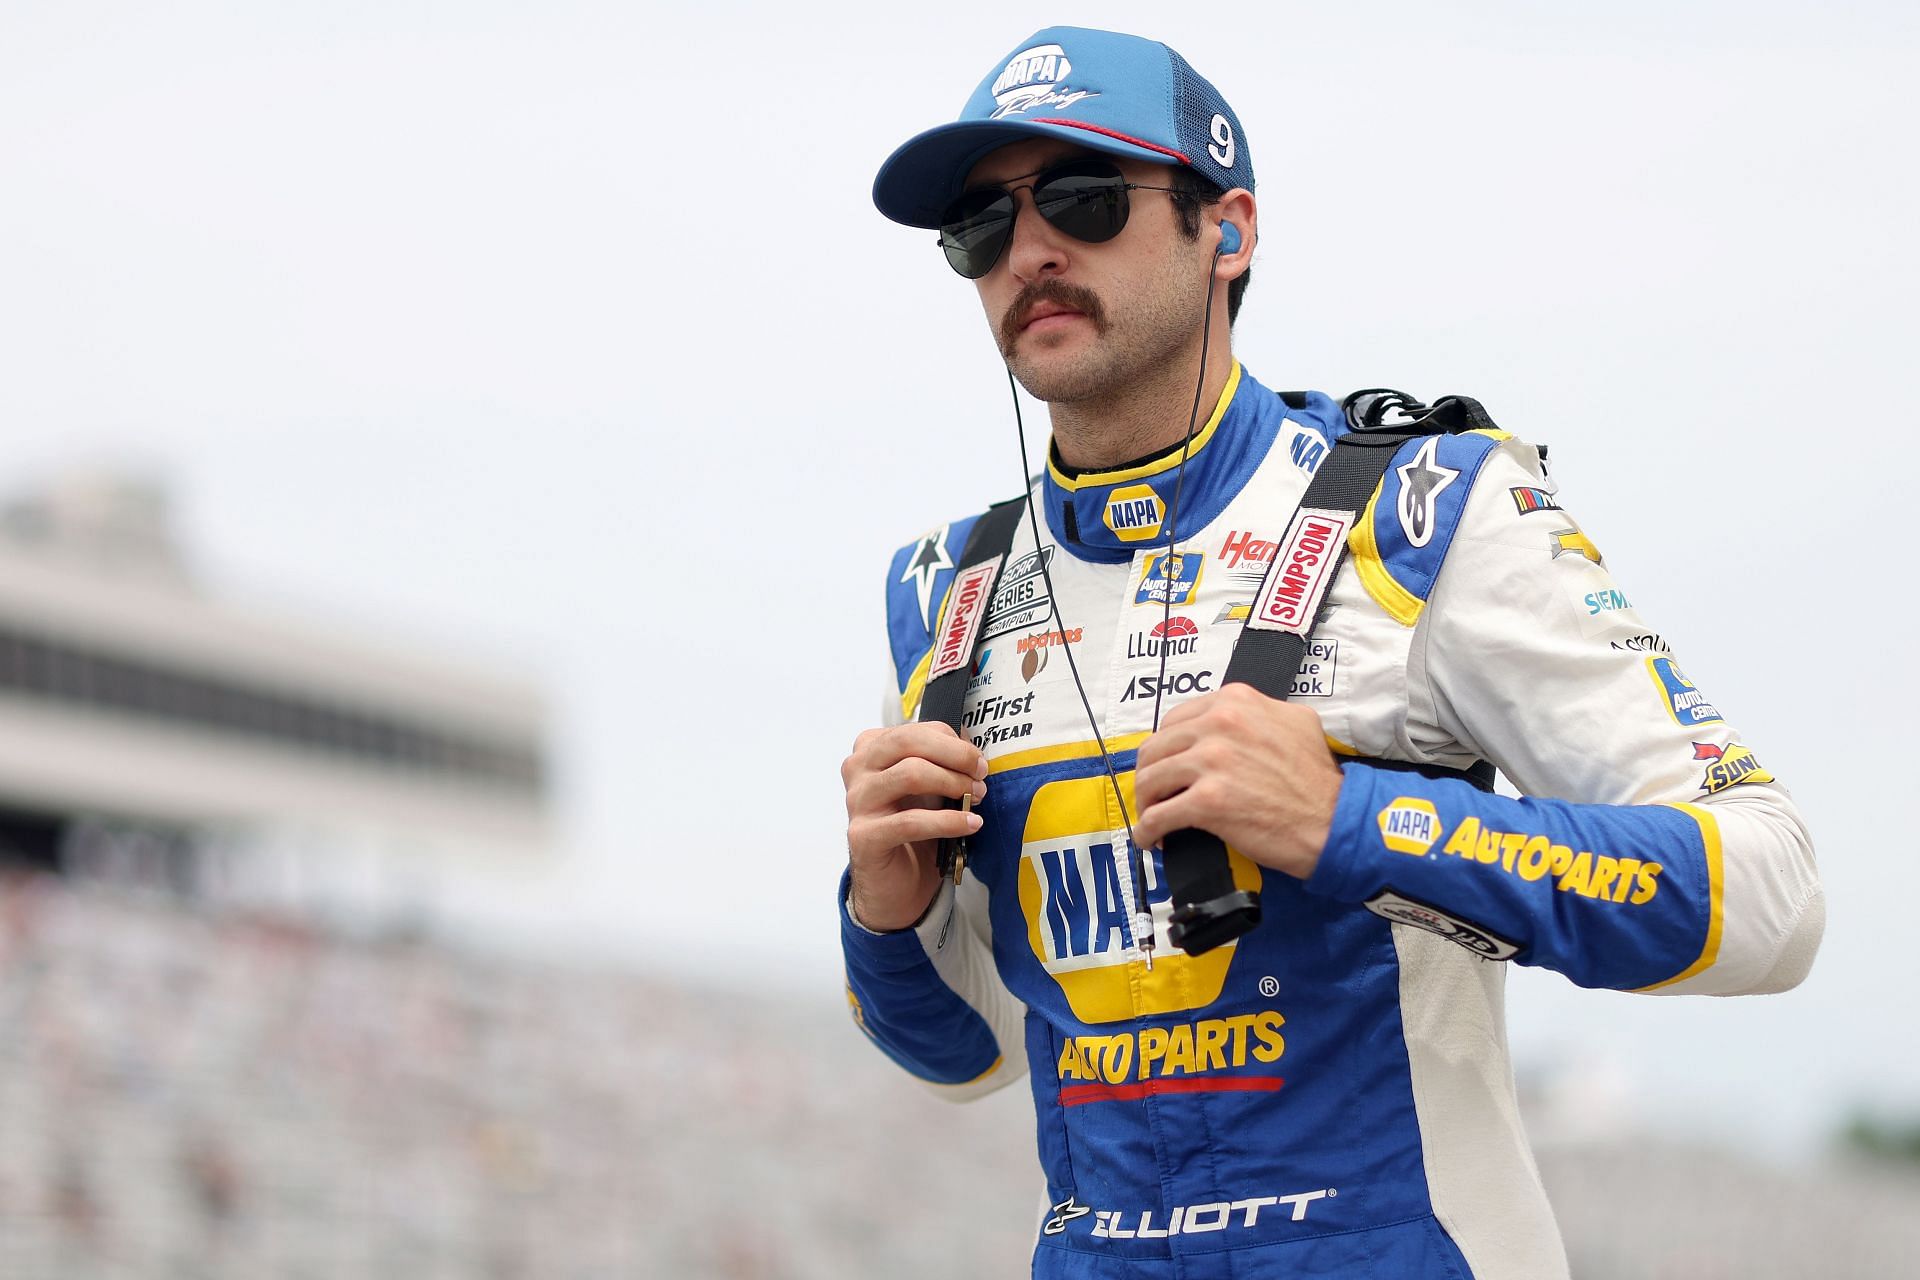 Chase Elliott walks the grid during qualifying for the NASCAR Cup Series Ambetter 301 at New Hampshire Motor Speedway